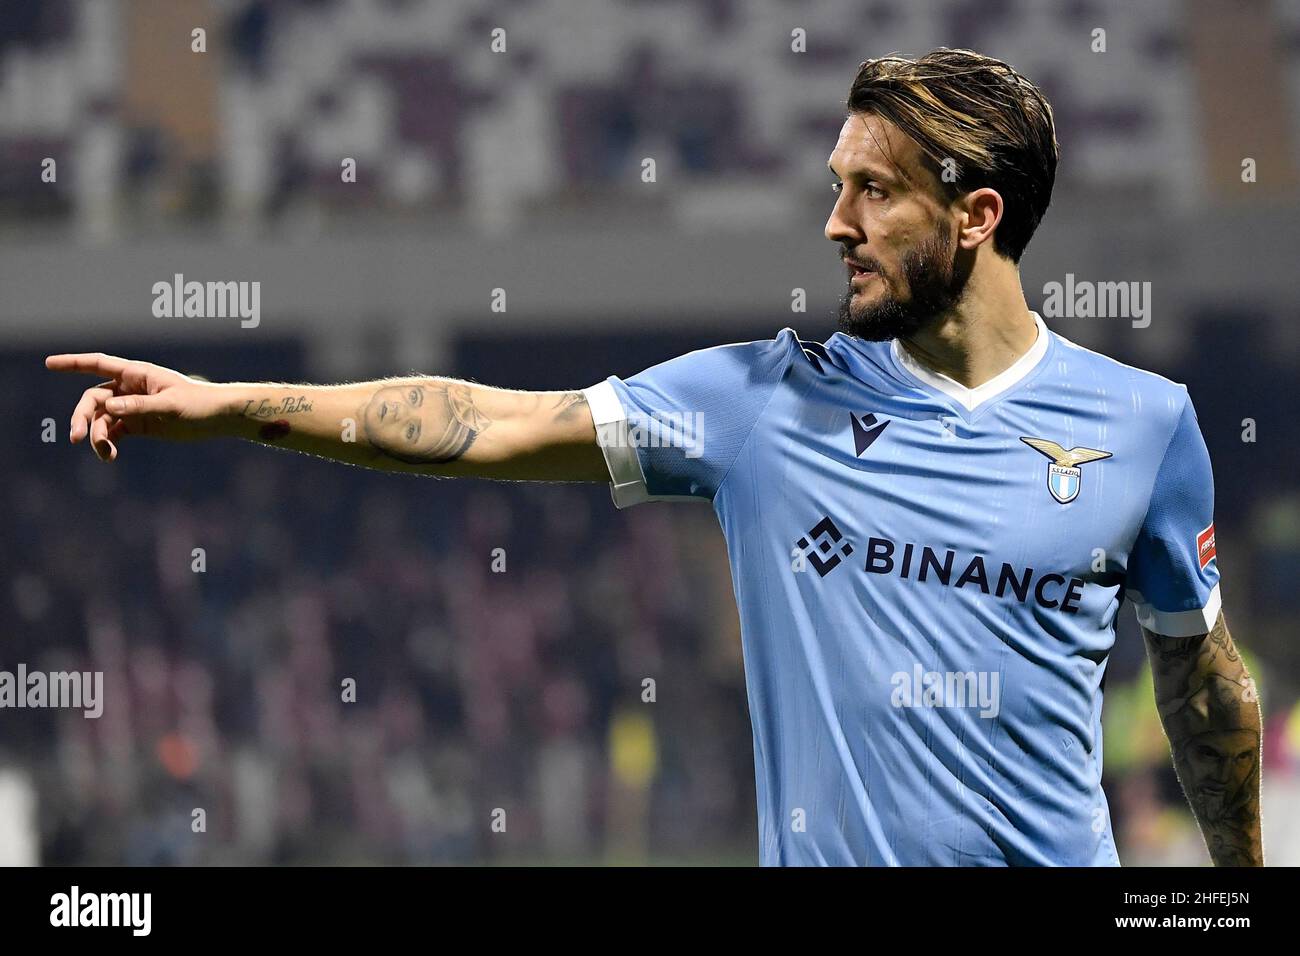 Salerno, Italy. 15th Jan, 2022. Luis Alberto of SS Lazio reacts during the Serie A football match between US Salernitana and SS Lazio at Arechi stadium in Salerno (Italy), January 15th, 2022. Photo Andrea Staccioli/Insidefoto Credit: insidefoto srl/Alamy Live News Stock Photo